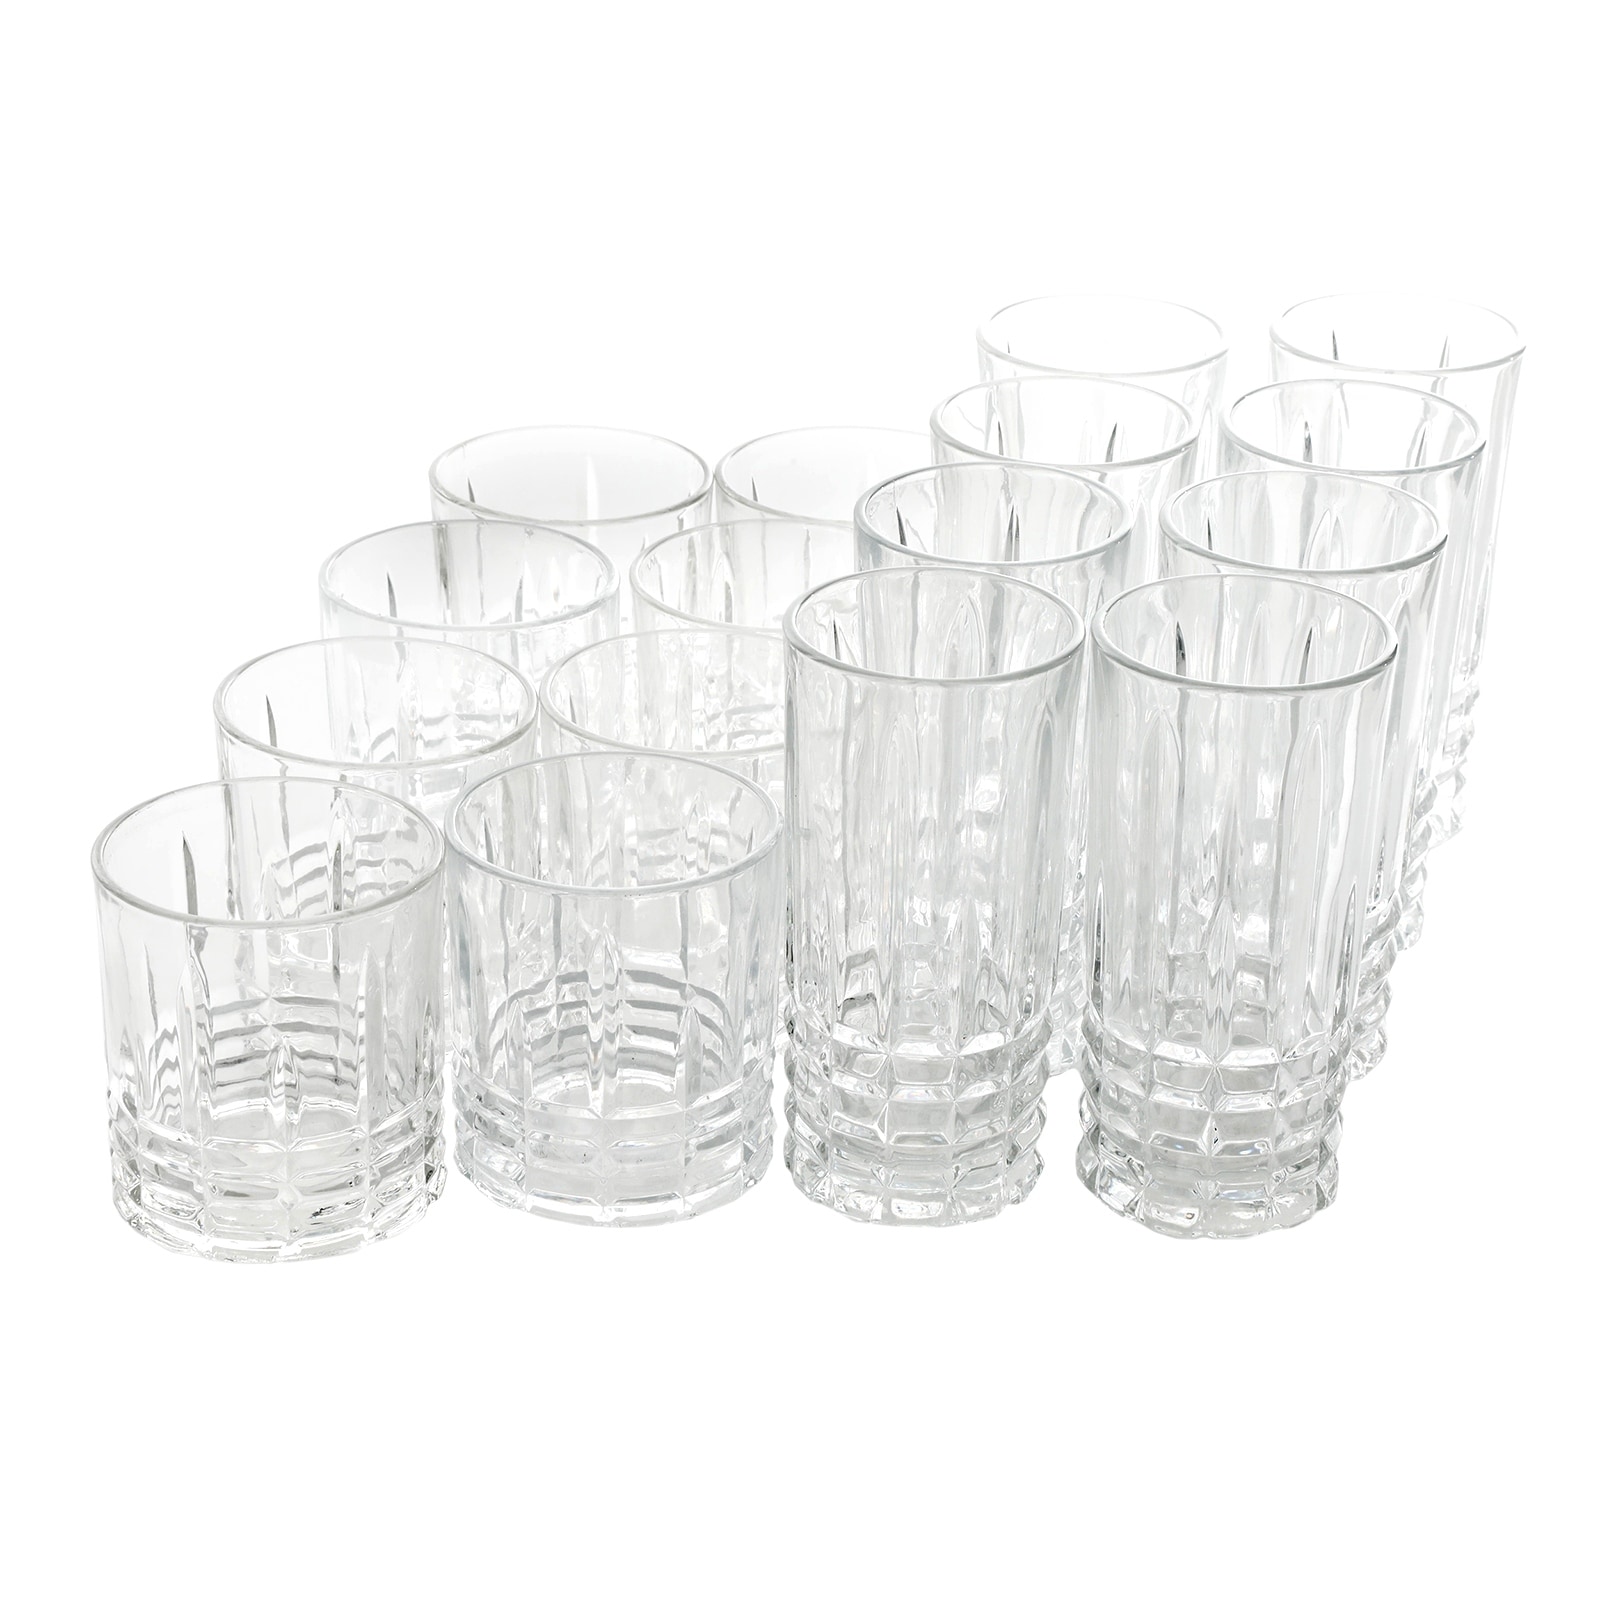 https://ak1.ostkcdn.com/images/products/is/images/direct/b3f0654c5b152aa2c7eff7240272190a2d7169c4/Gibson-Home-Jewelite-16-Piece-Tumbler-and-Double-Old-Fashioned-Glass-Set.jpg